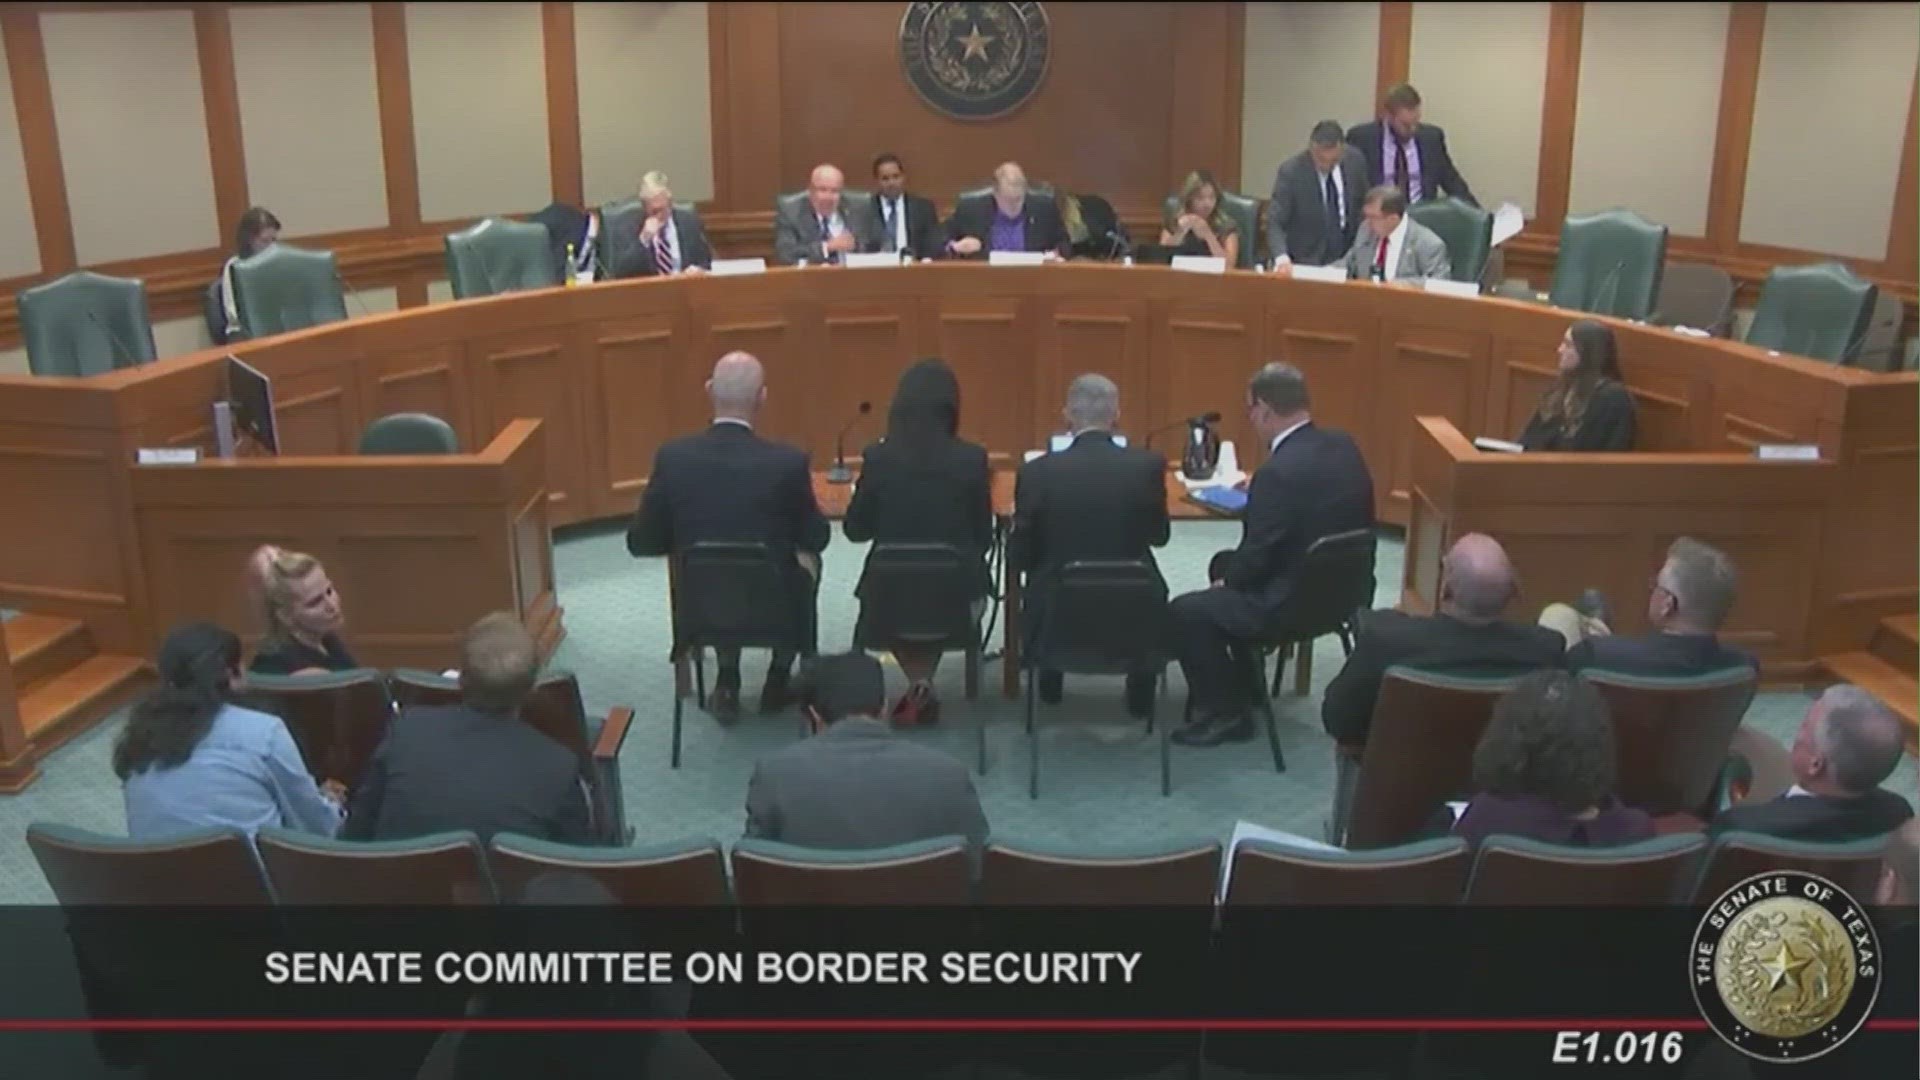 The Senate Border Security Committee heard public testimony on two bills on Tuesday afternoon.